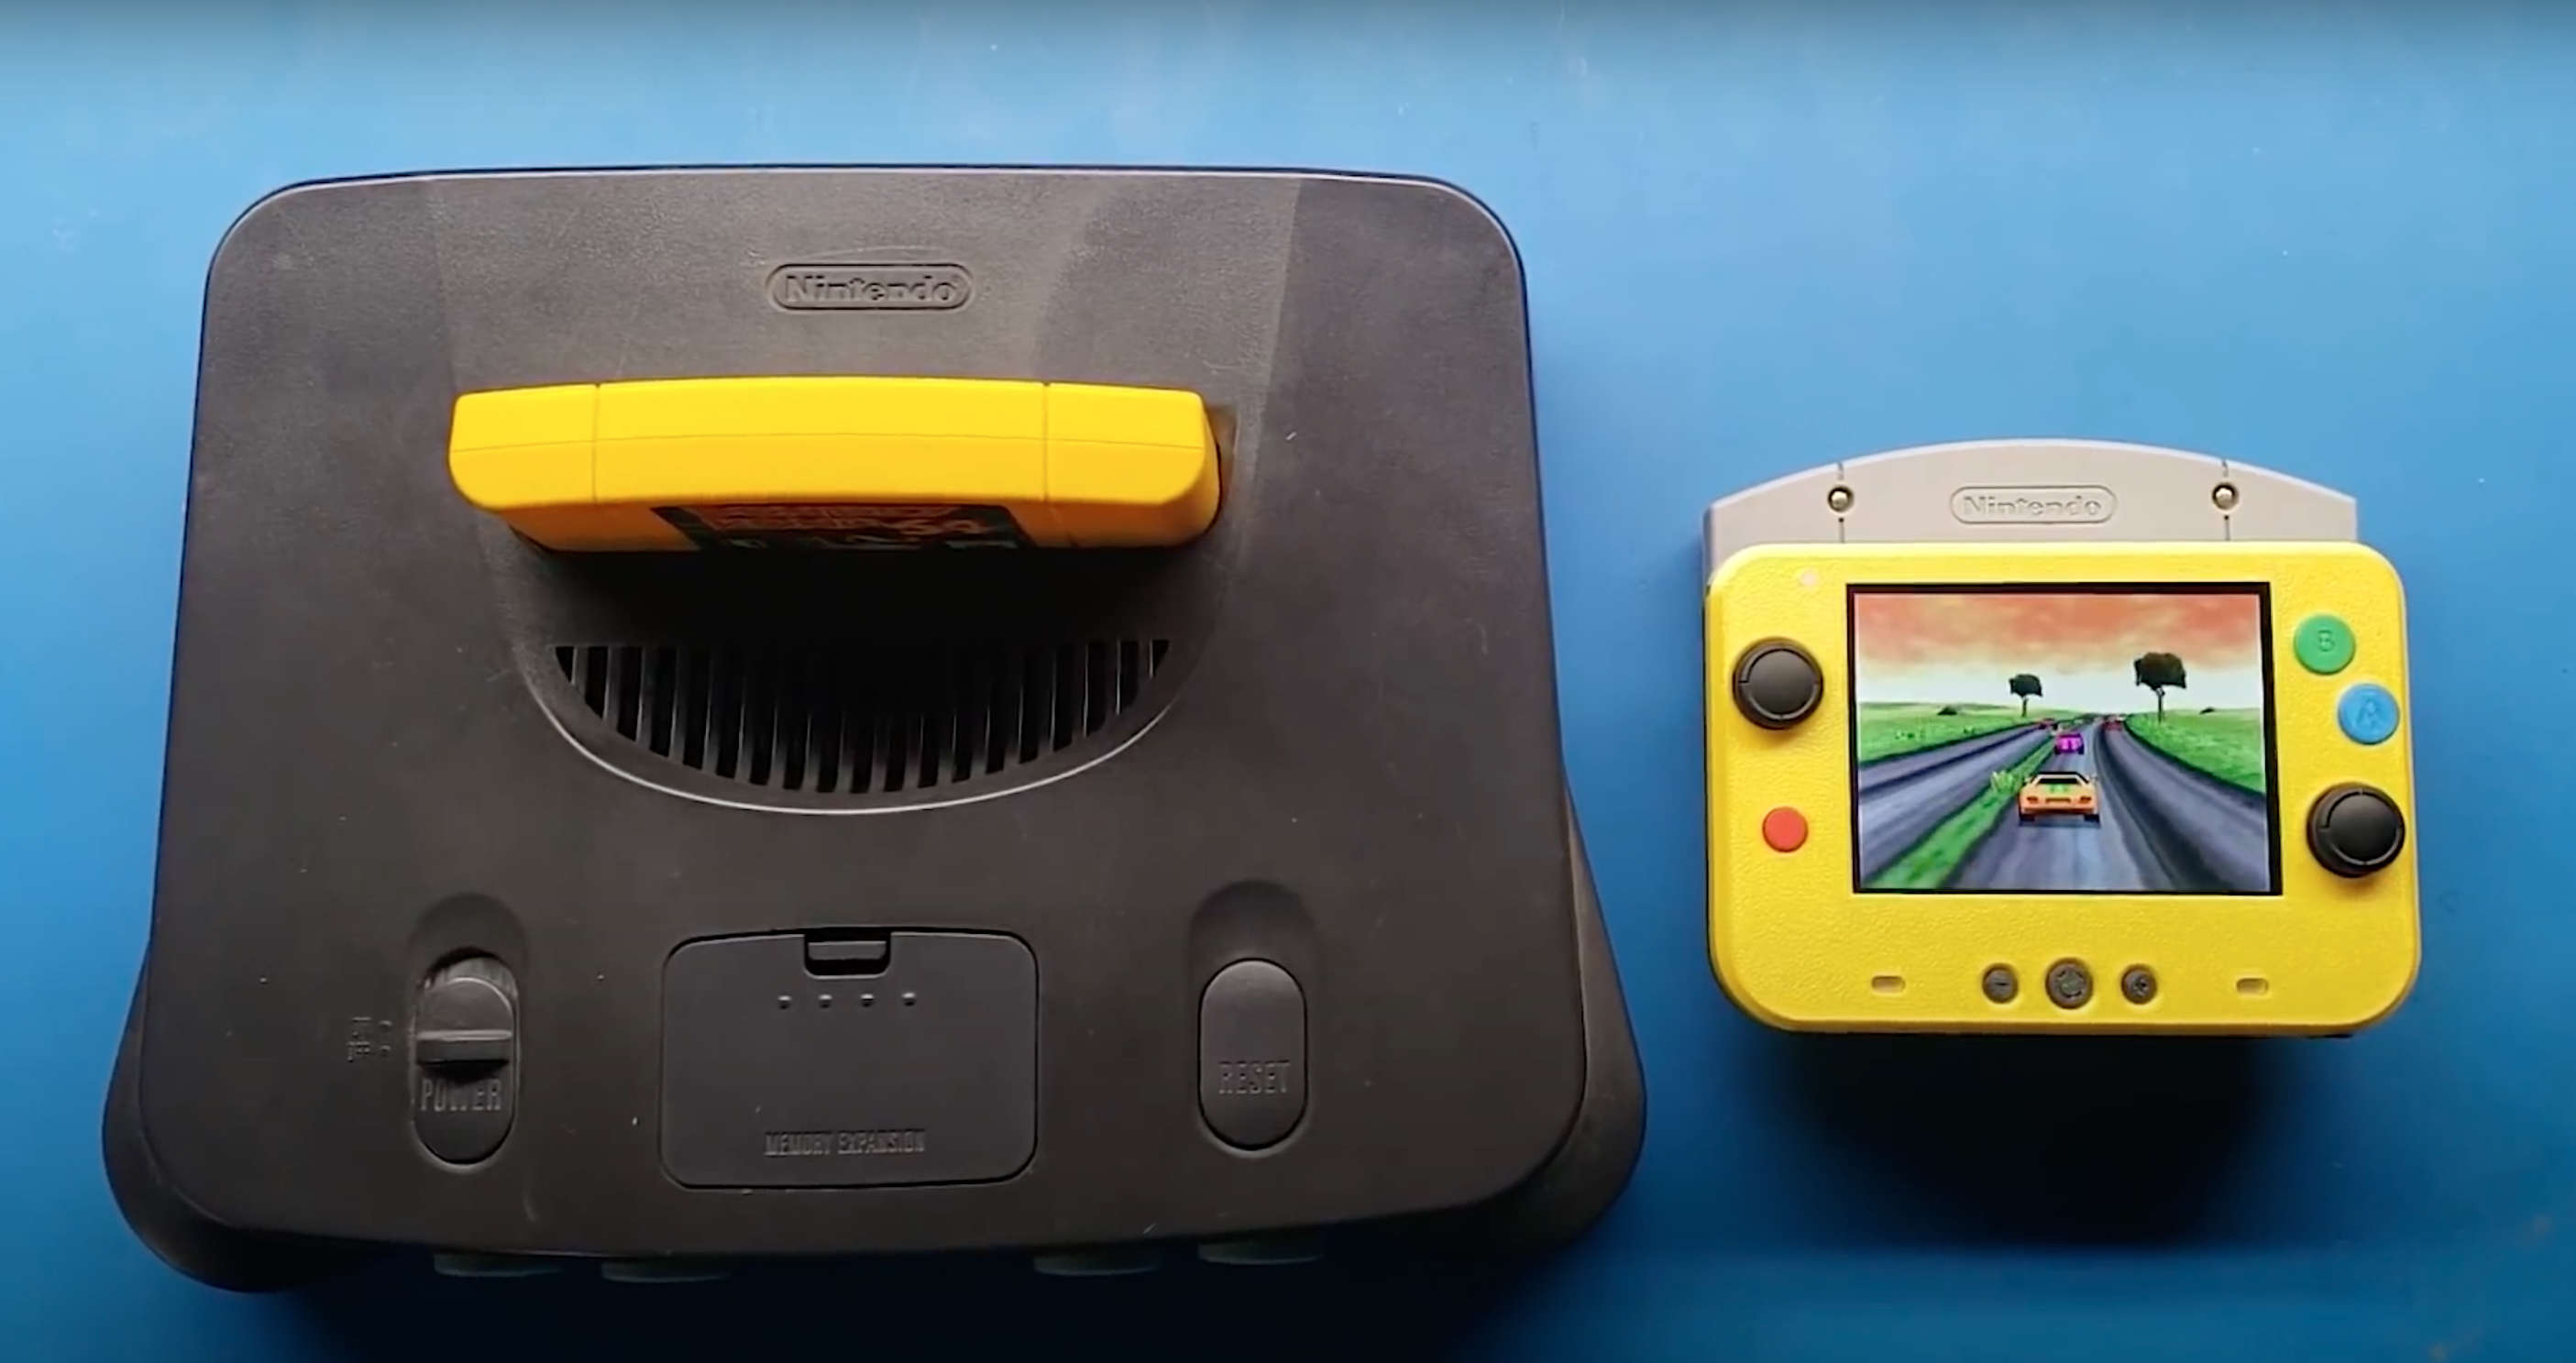 Nintendo 64 recreated in modder's tiny 3D printed portable console